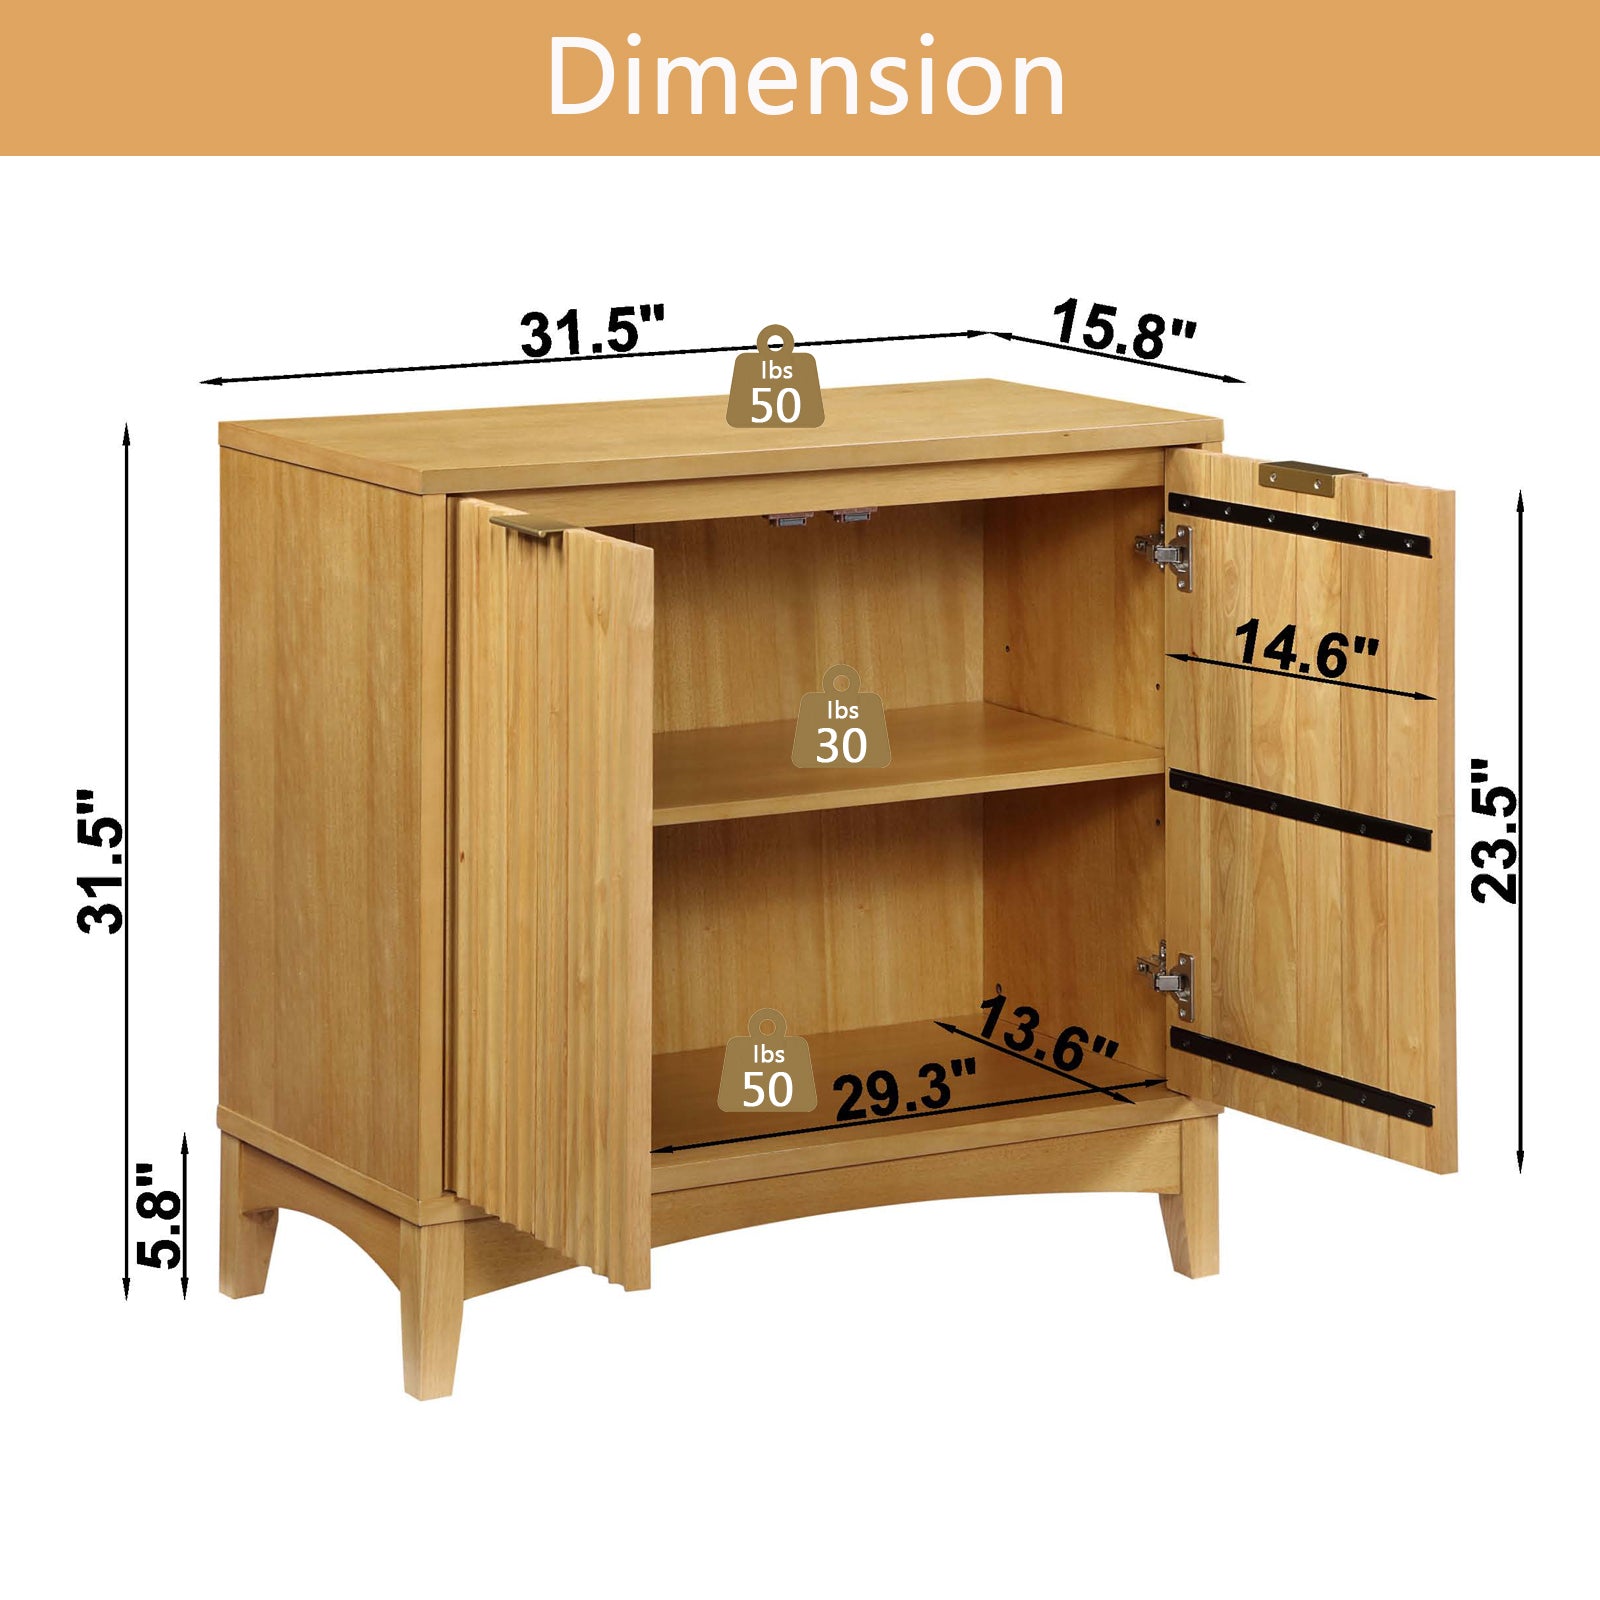 Storage Cabinet with 2 Doors and Adjustable Shelves natural-rubber wood